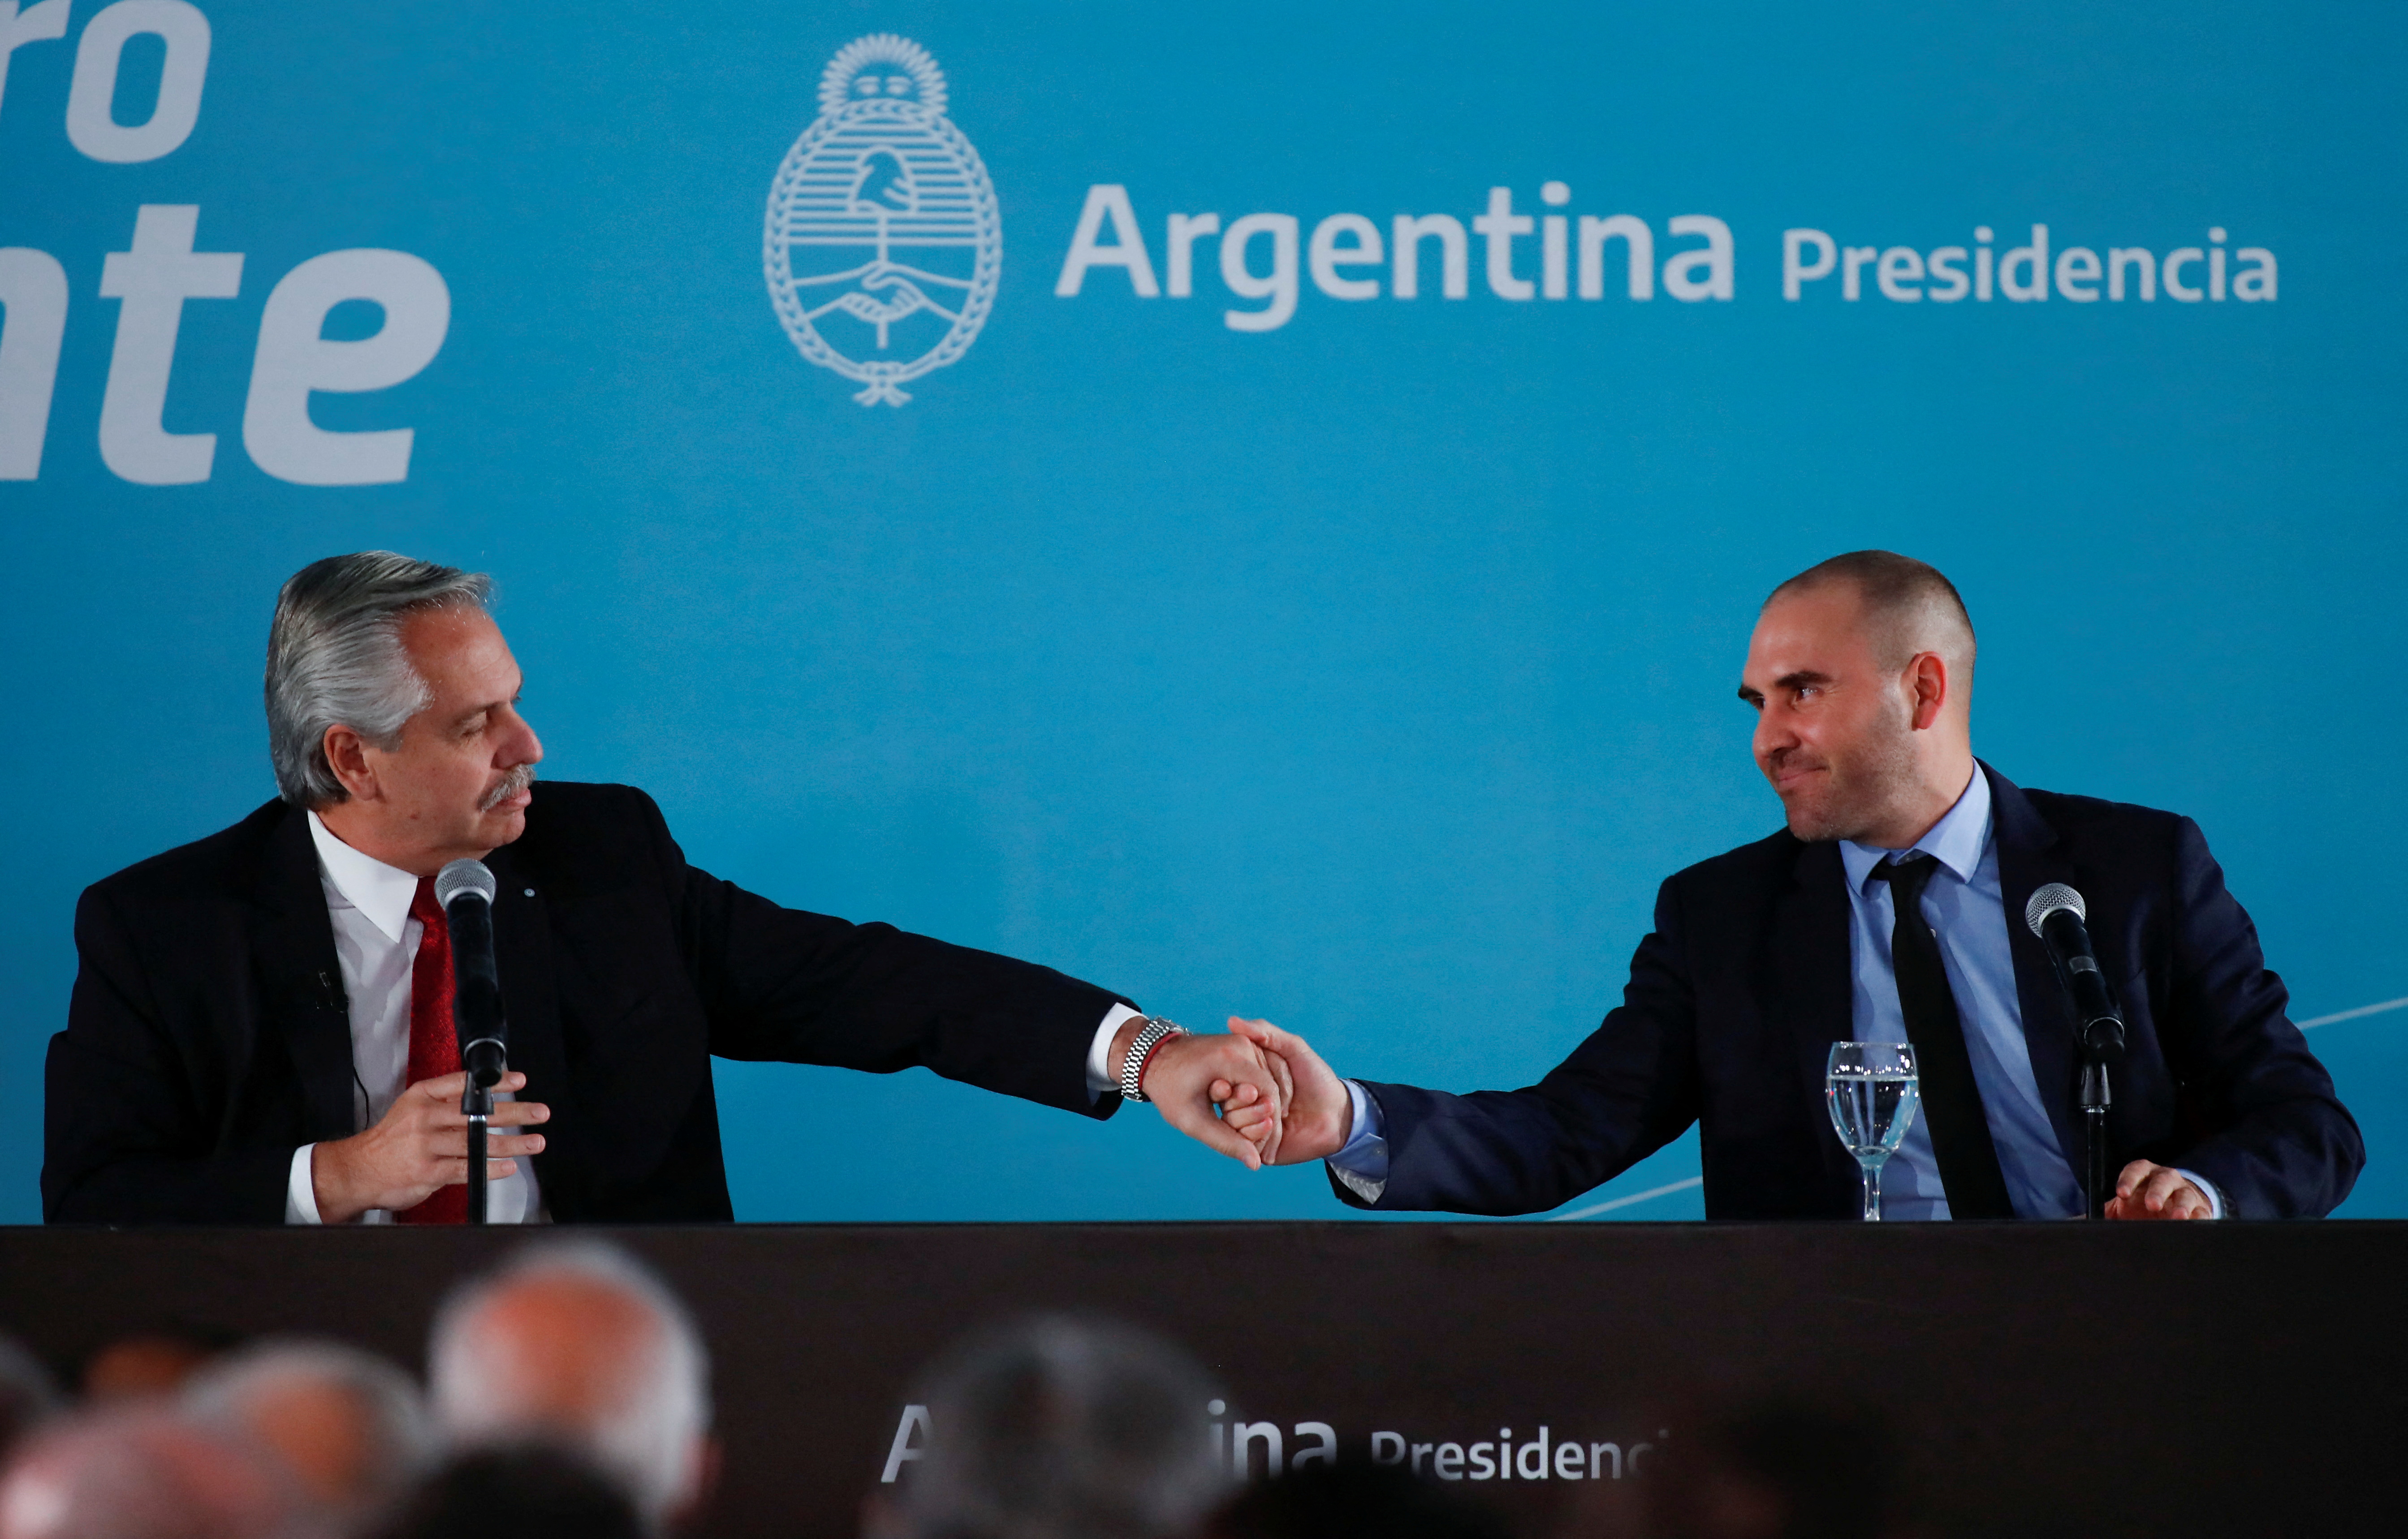 Argentine President Alberto Fernandez shakes hands with Argentine Economy Minister Martin Guzman during announcement of creation of a tax on a so-called "extraordinary profits" for big companies that earned more-than-expected due to the war in Ukraine, at the Museo del Bicentenario in Casa Rosada presidential palace, in Buenos Aires, Argentina June 6, 2022. REUTERS/Agustin Marcarian